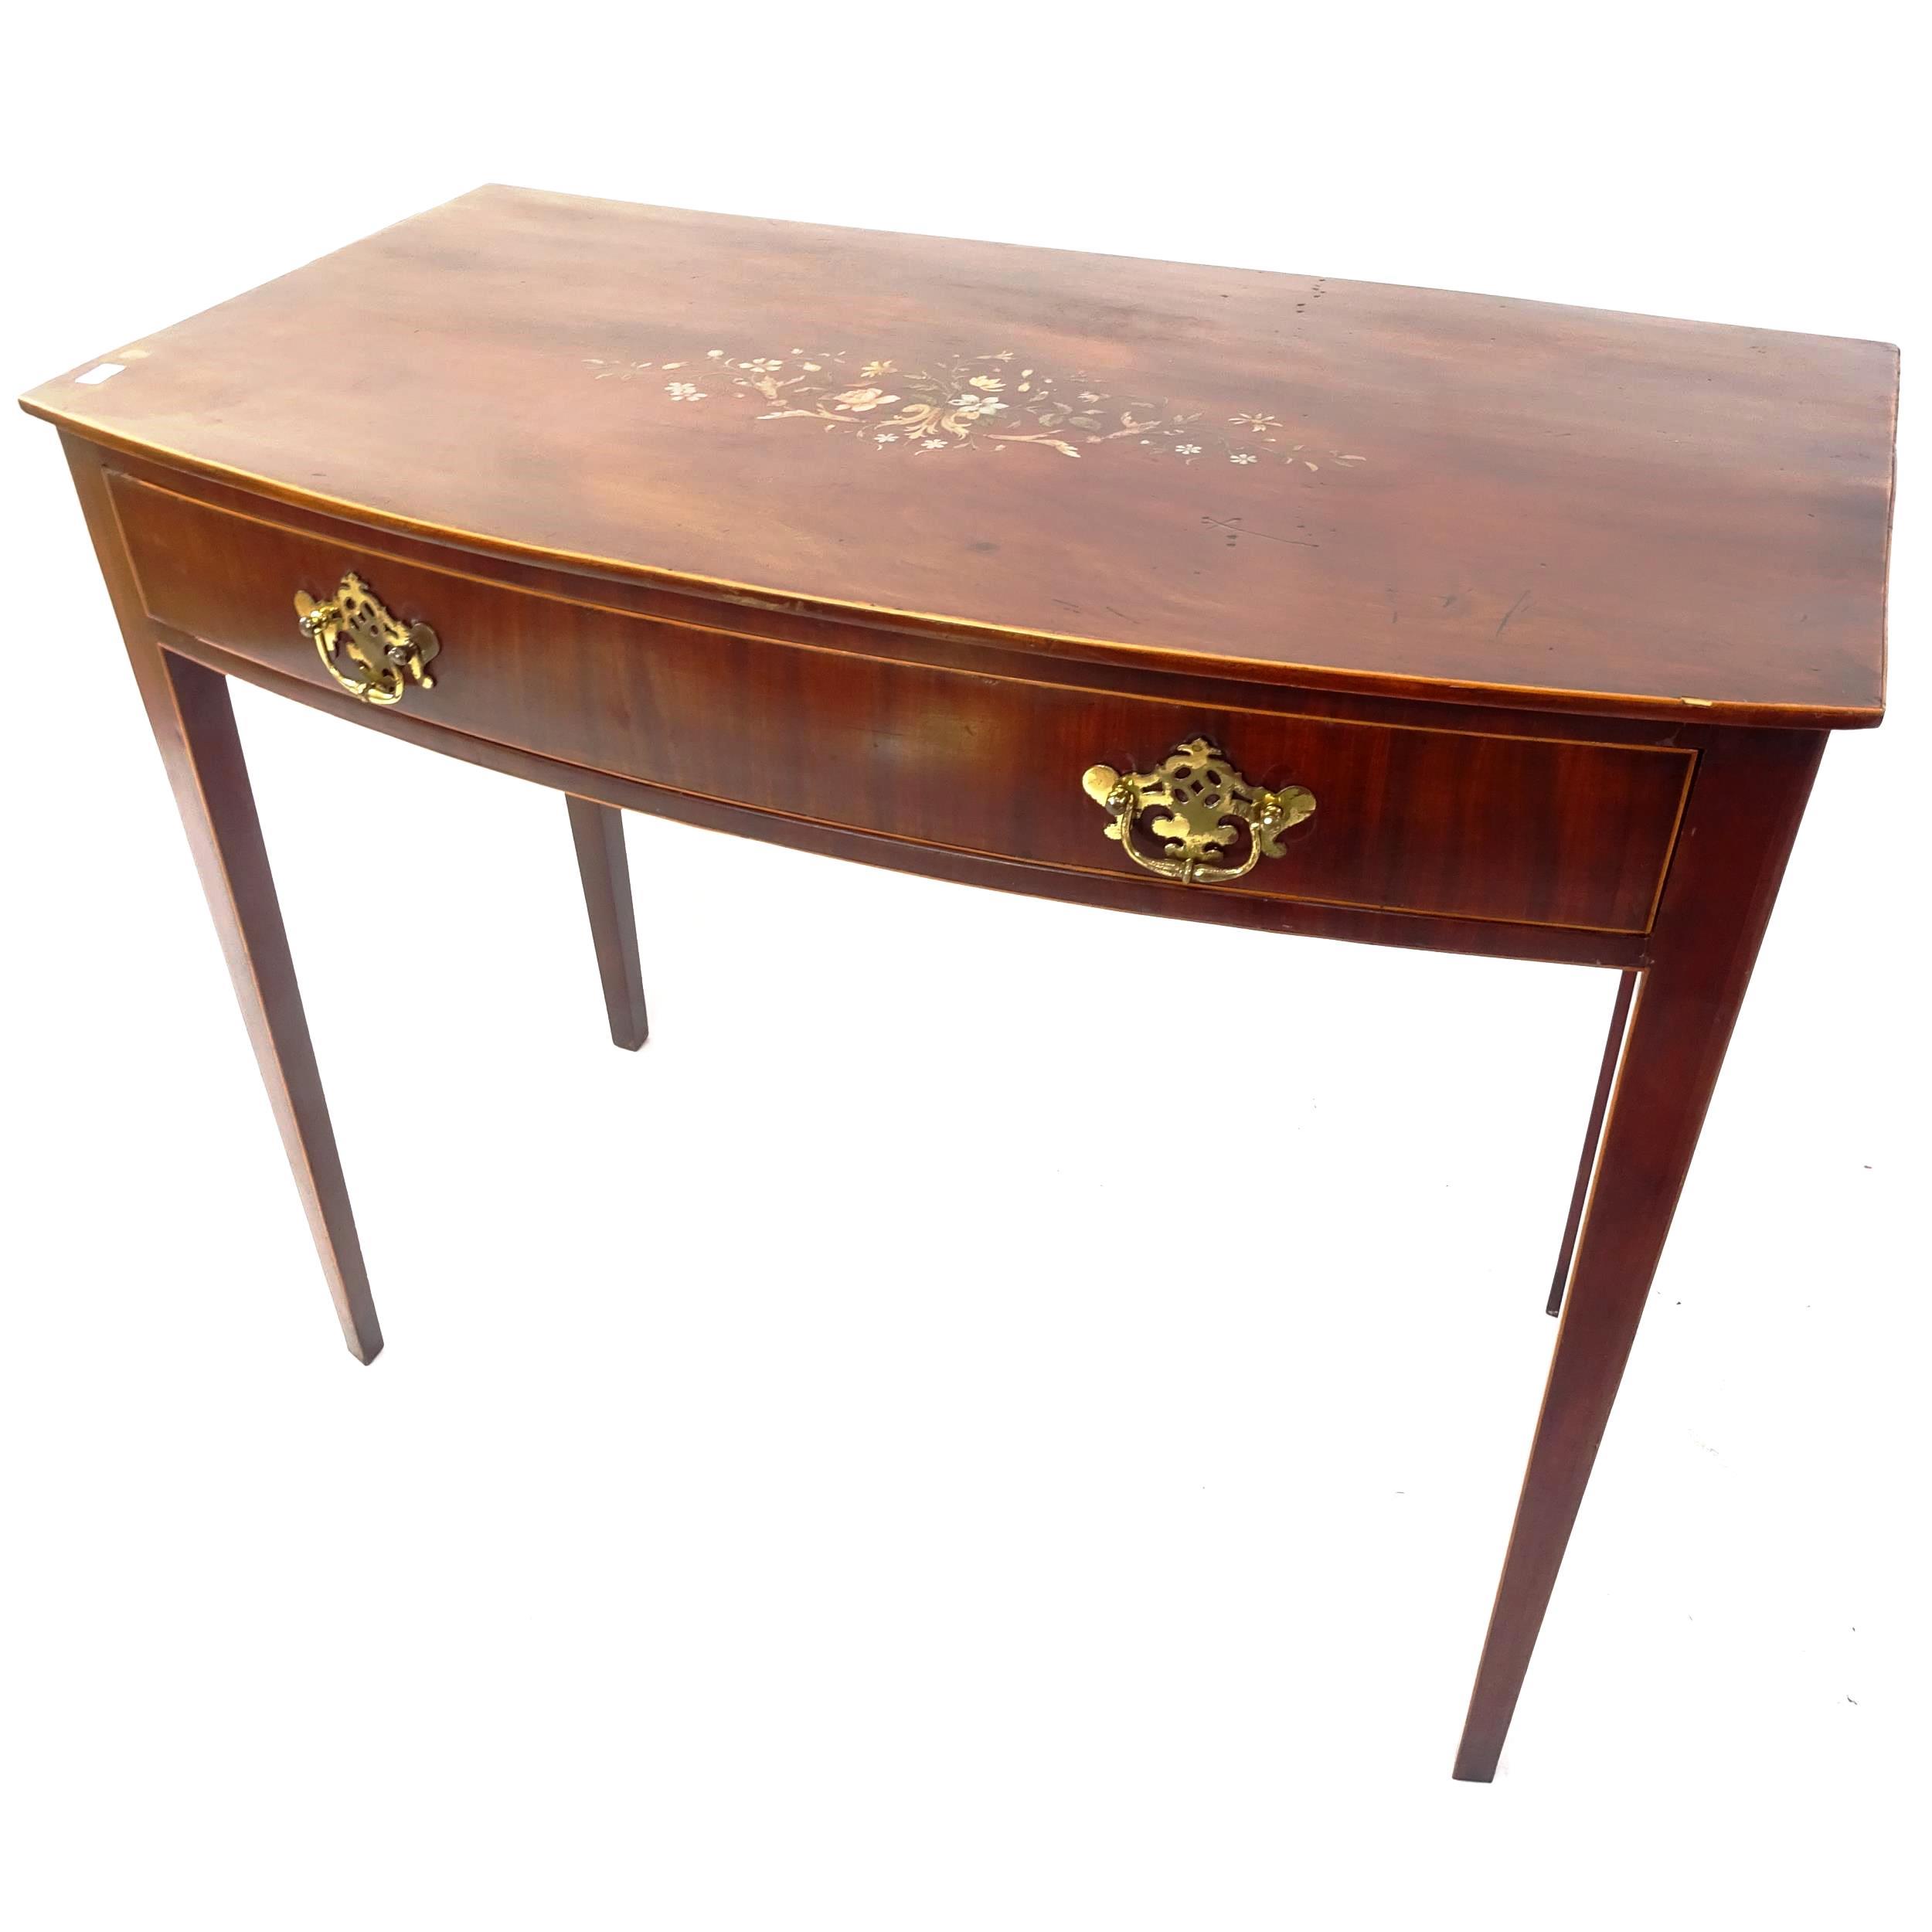 A 19th century mahogany bow-front side table, with painted floral top, with a satinwood-strung